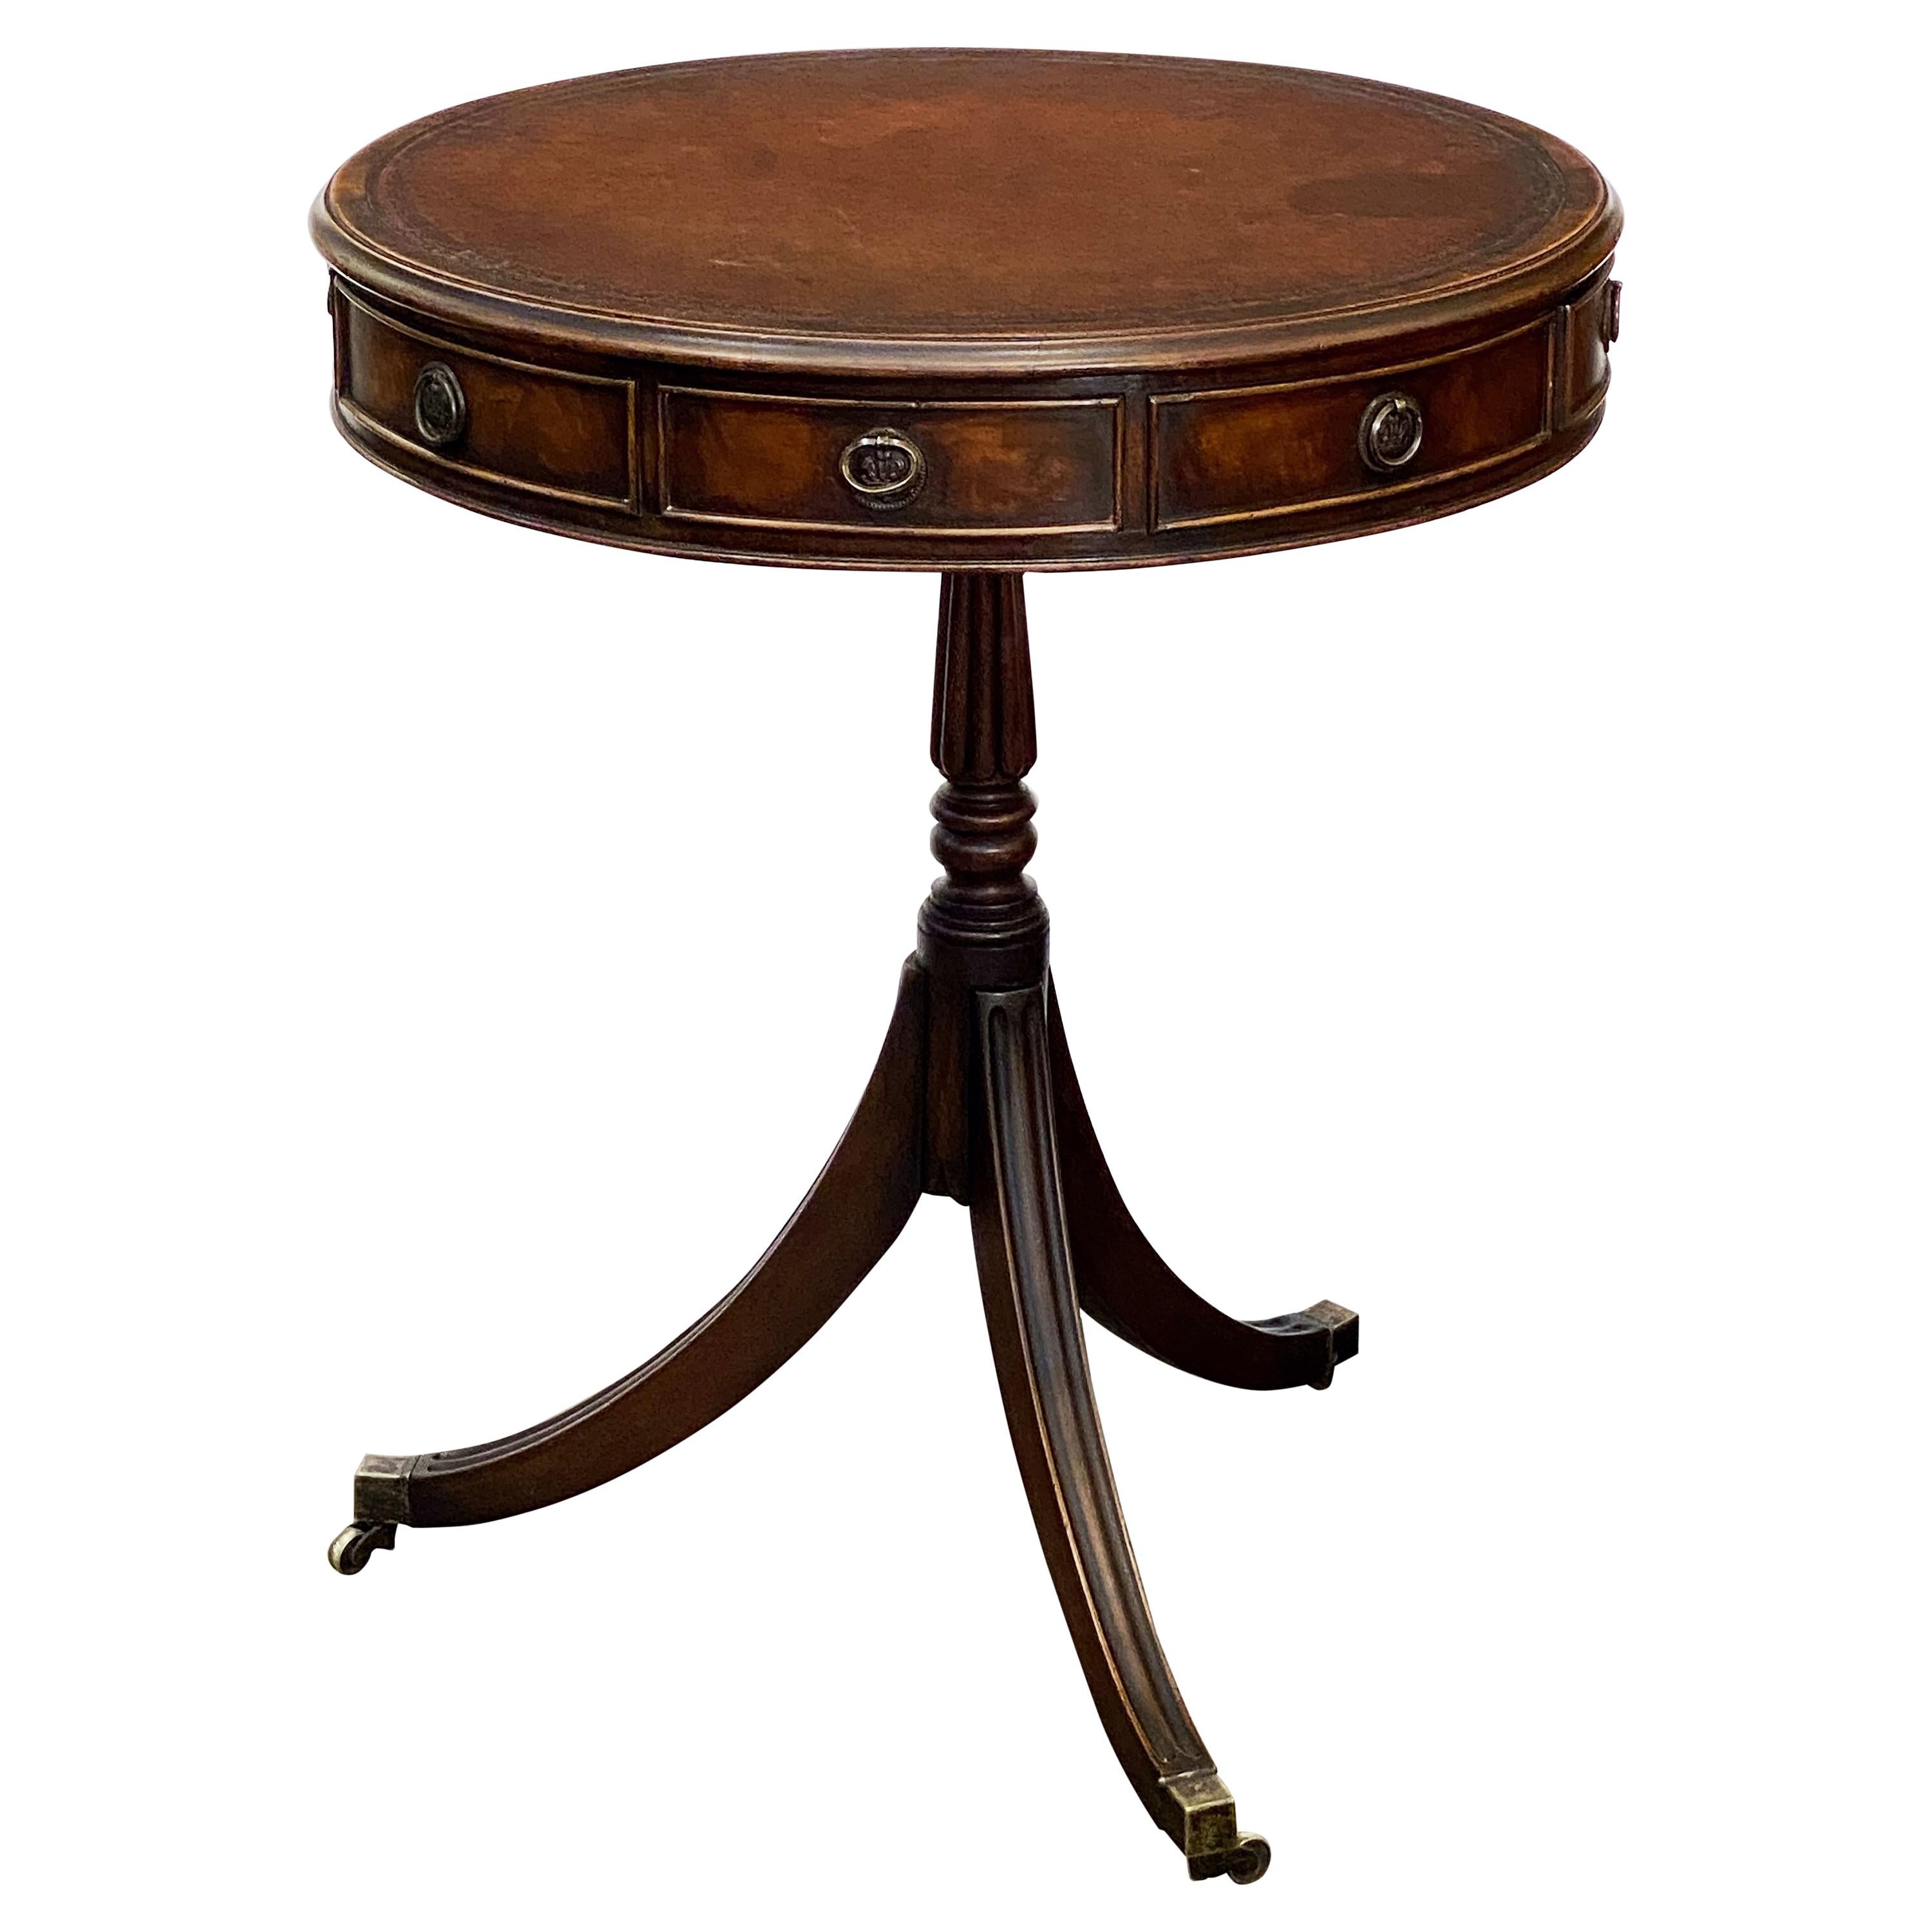 English Drum Table of Mahogany with Leather Top from the Edwardian Era For Sale